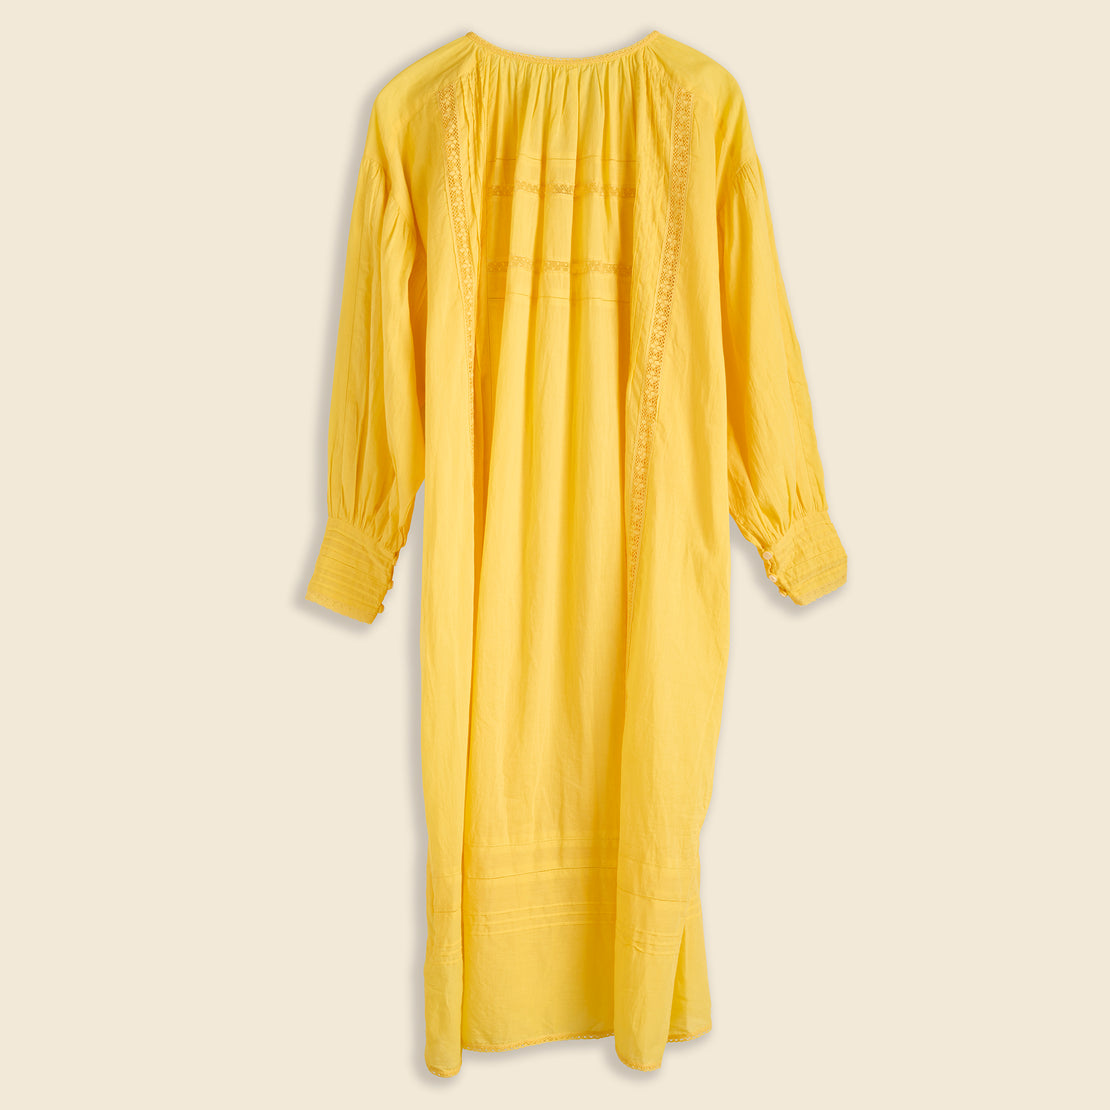 Oversized VinLace Dress - Yellow - BEAMS BOY - STAG Provisions - W - Onepiece - Dress